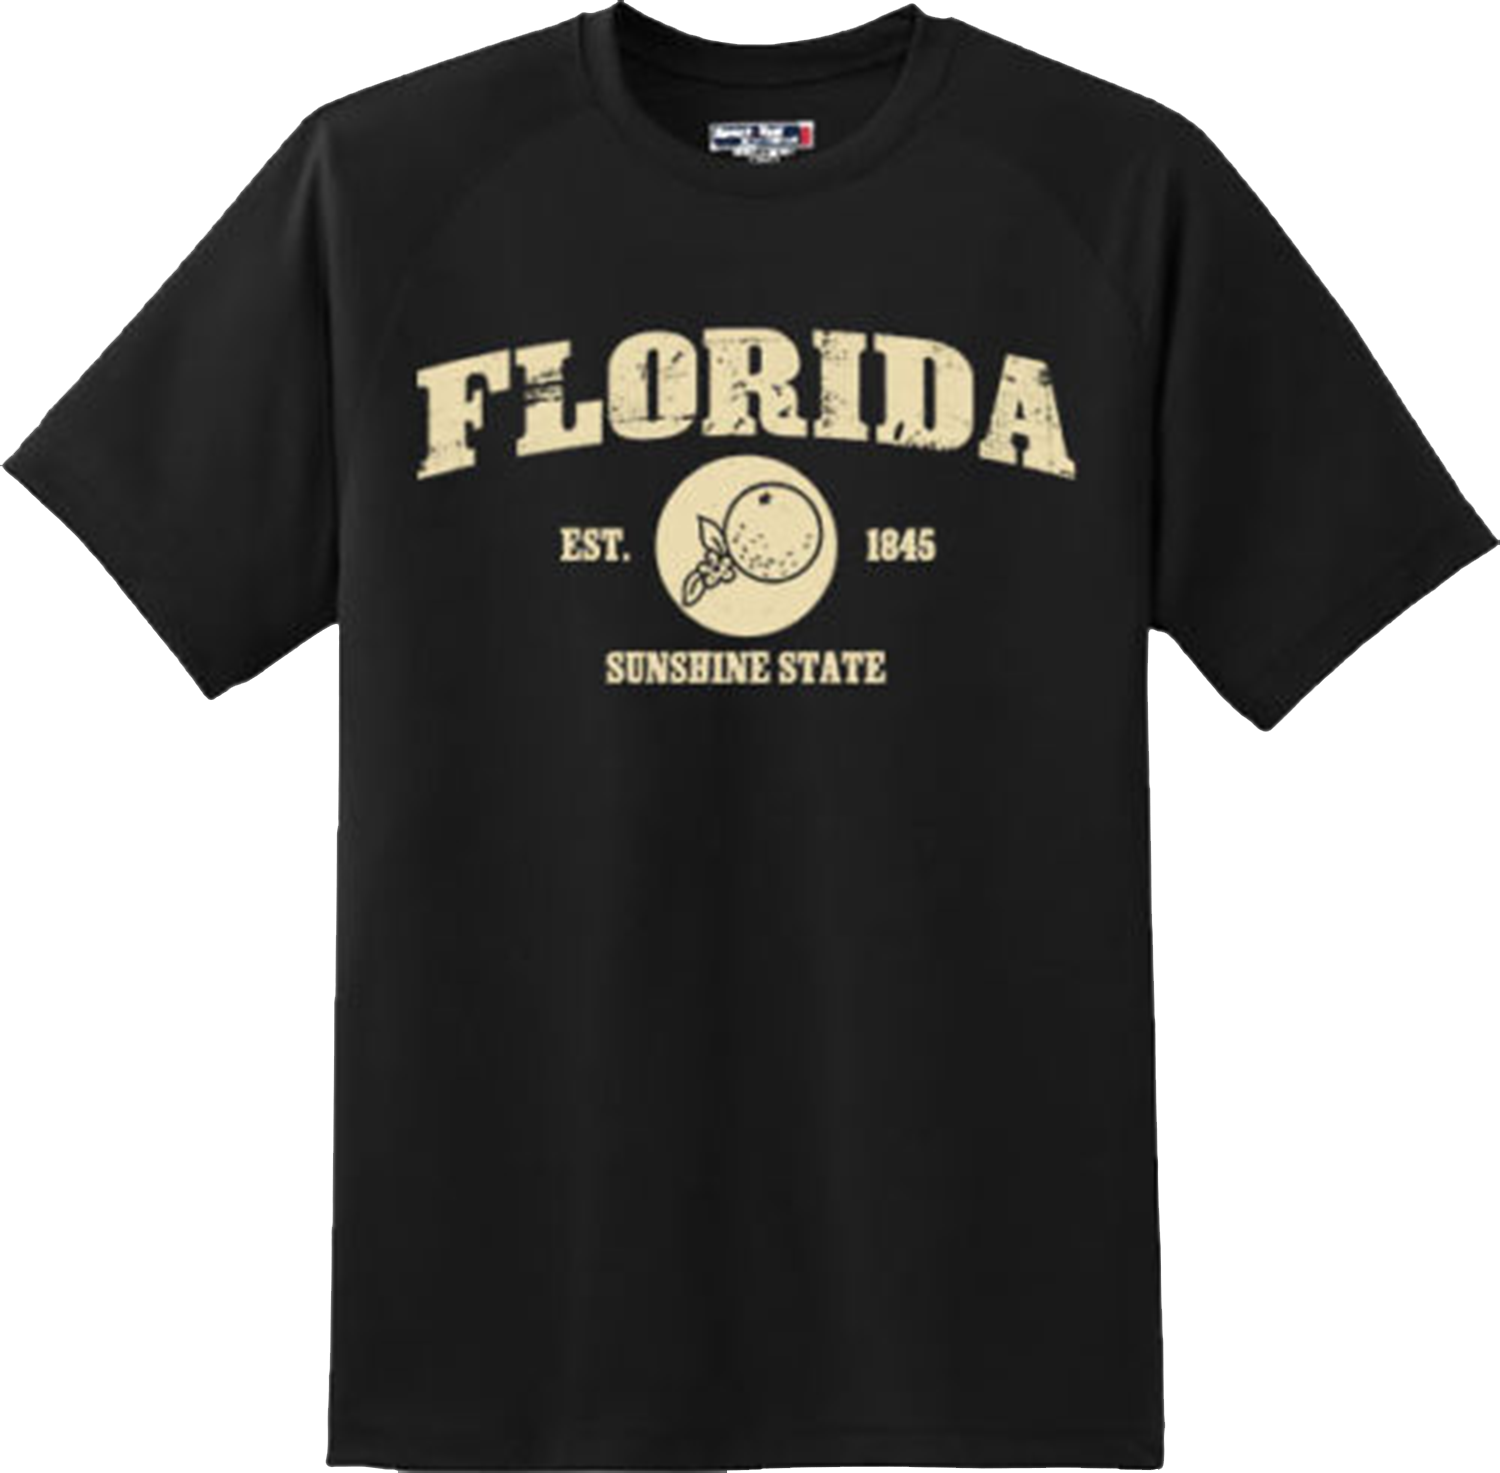 Florida State Vintage Retro Hometown America Gift T Shirt New Graphic Tee